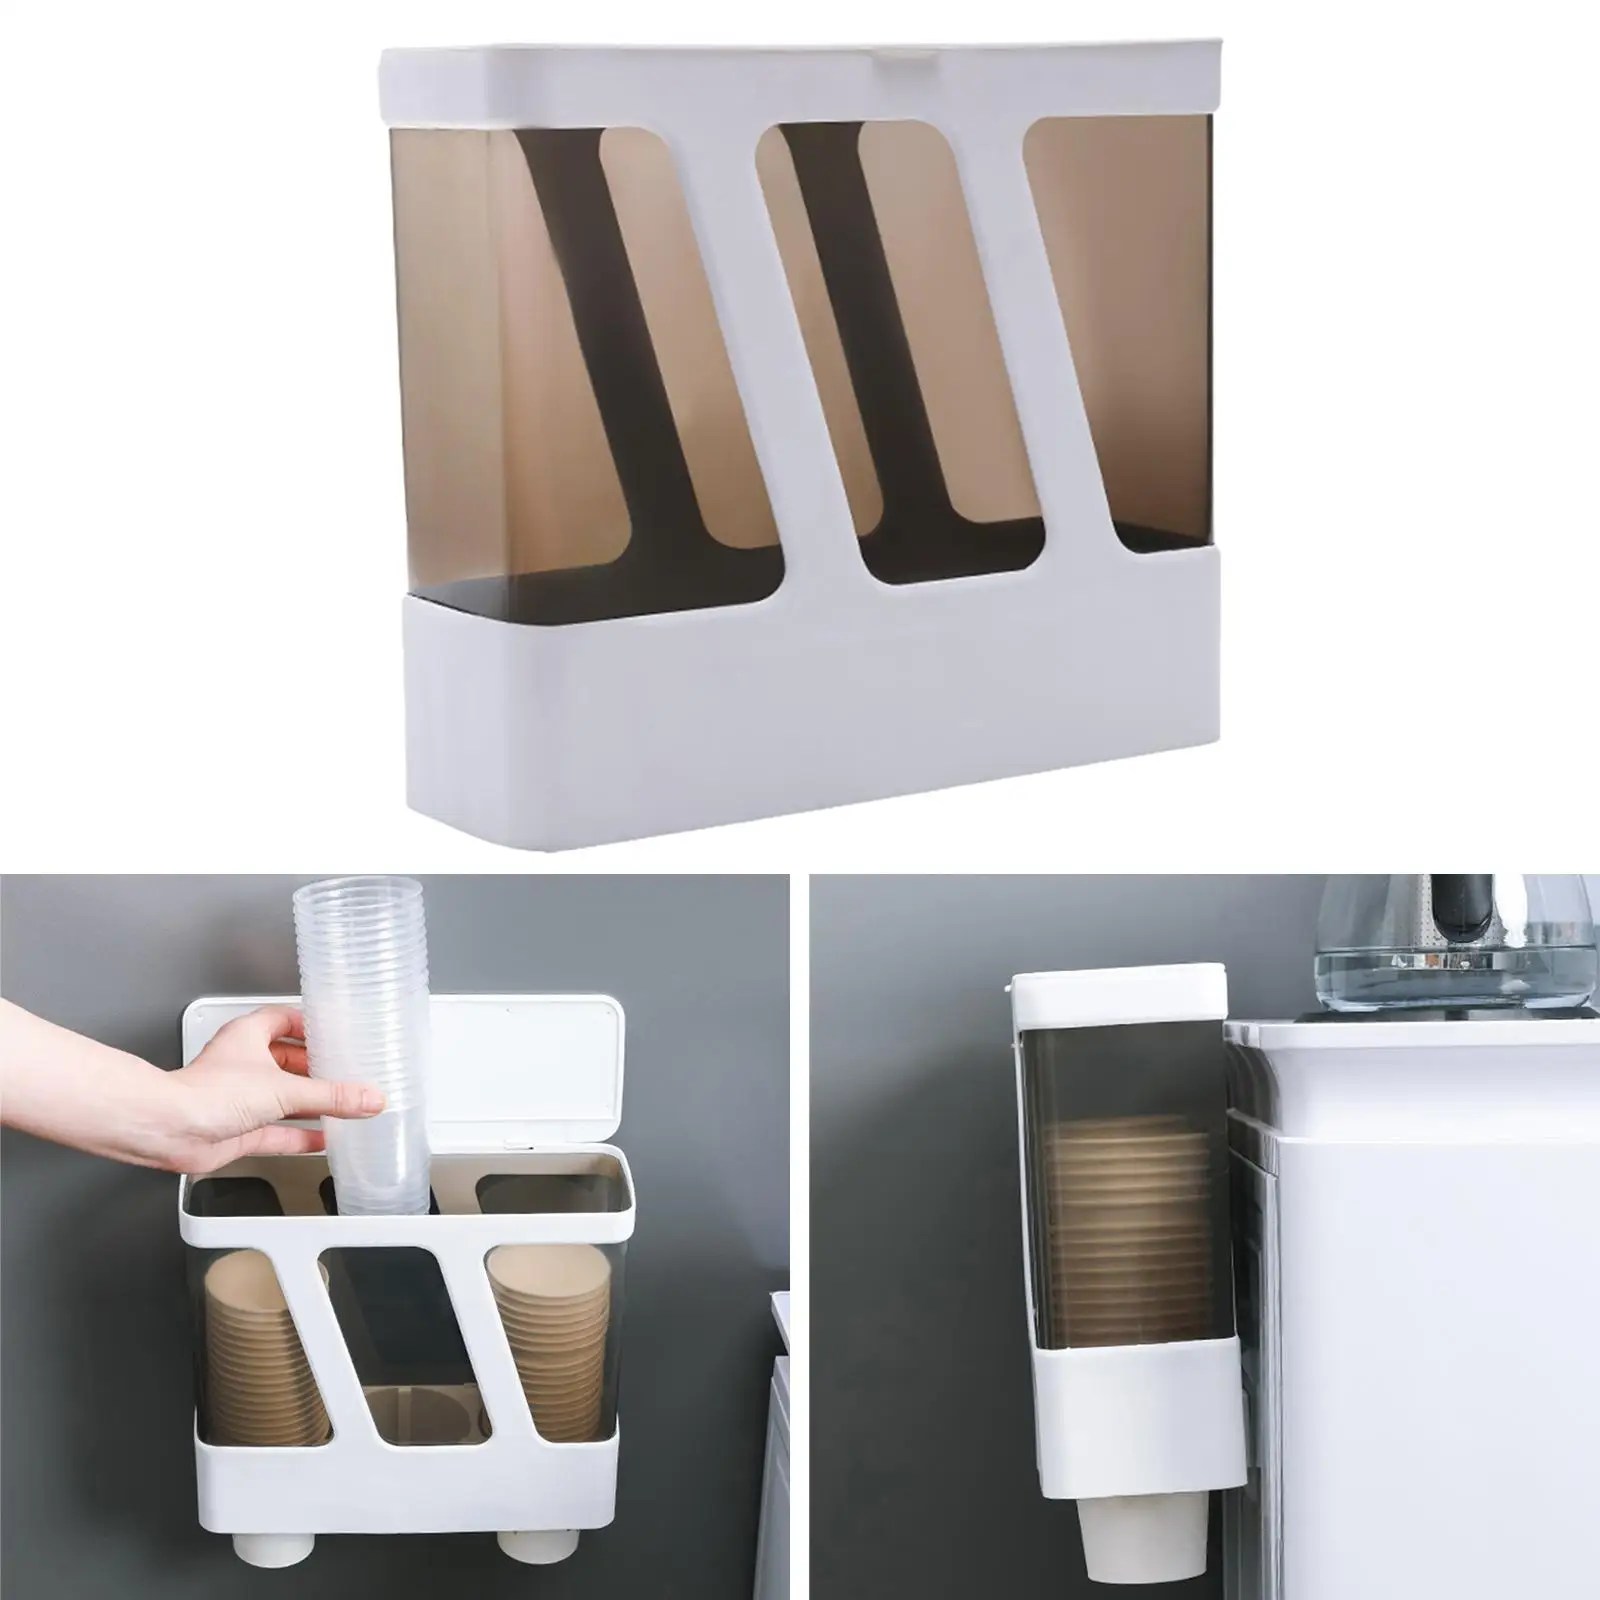 Dustproof Coffee Cup Organizer Countertop Storage Rack 3 Compartments Paper Cup Dispenser for Party Office Halloween Home